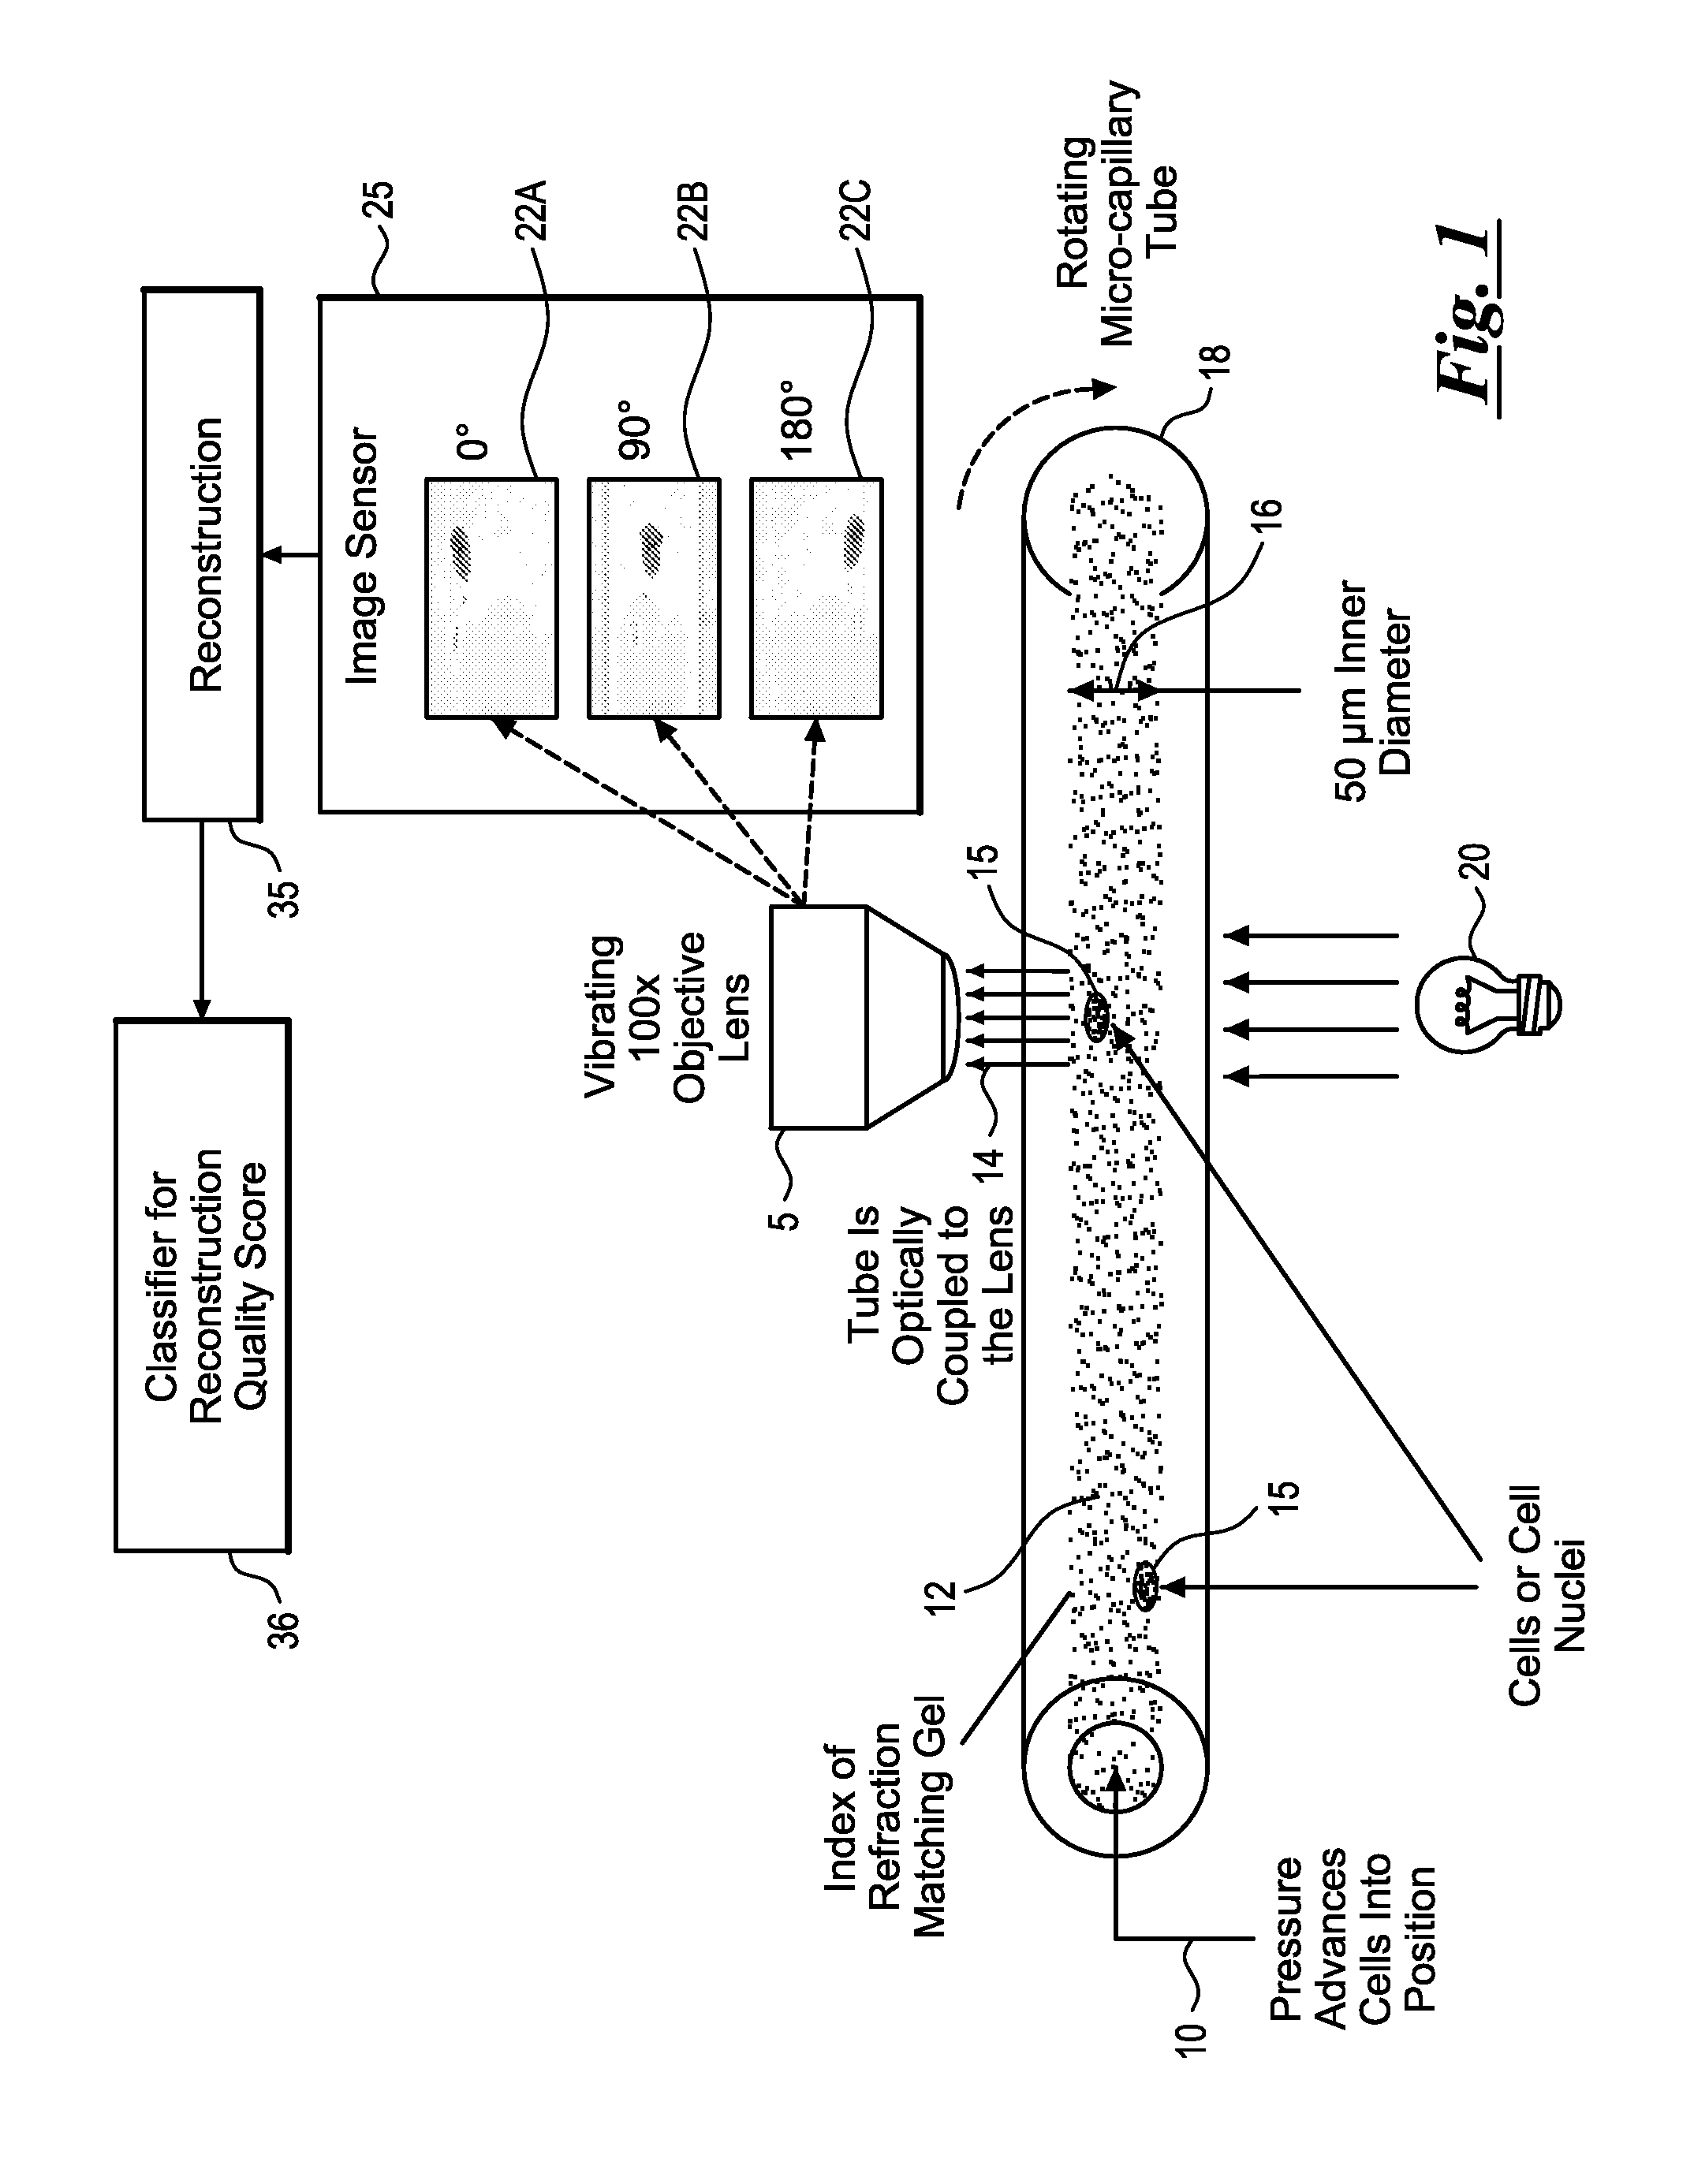 System and Method for Detecting Poor Quality in 3D Reconstructions